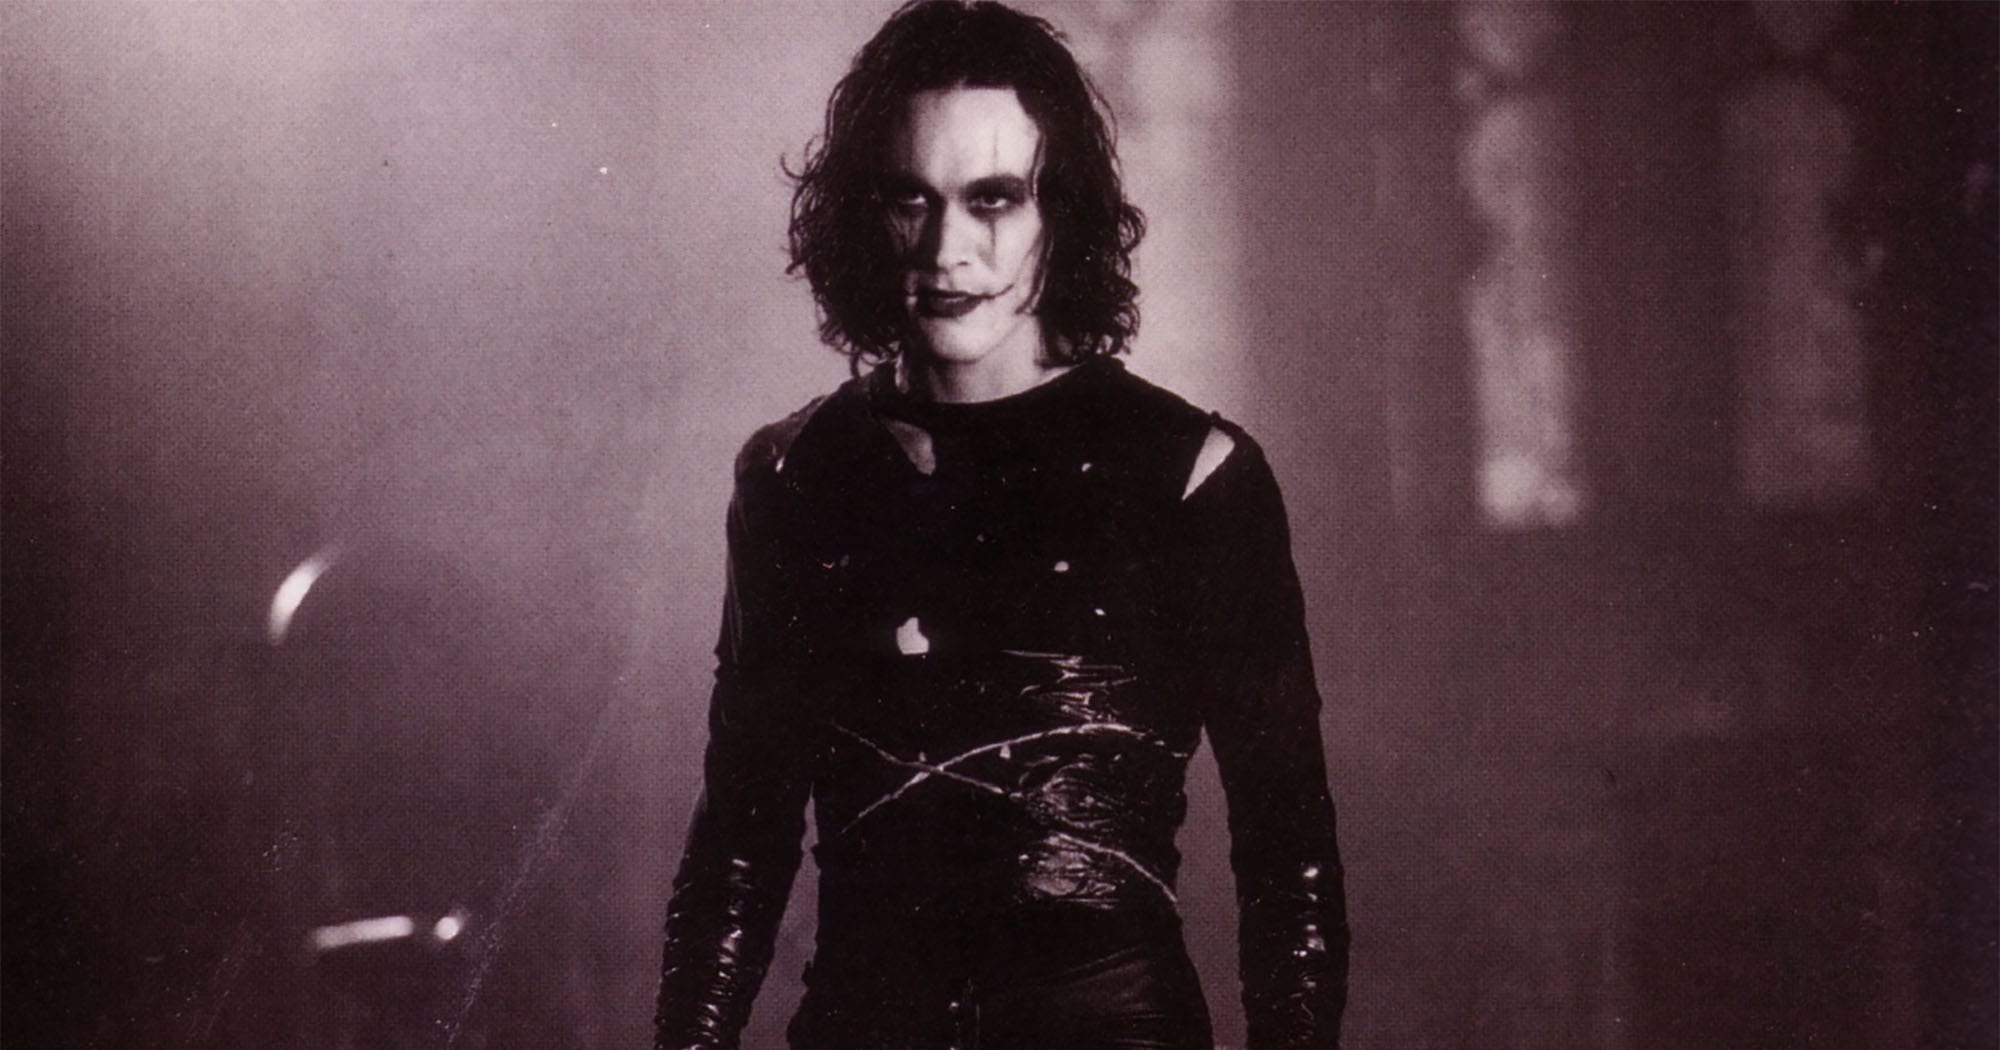 Smoke out those eyes, put on your fave lace gown, and flex those bad attitude muscles – here are the top ten films goths have adopted over the ages.